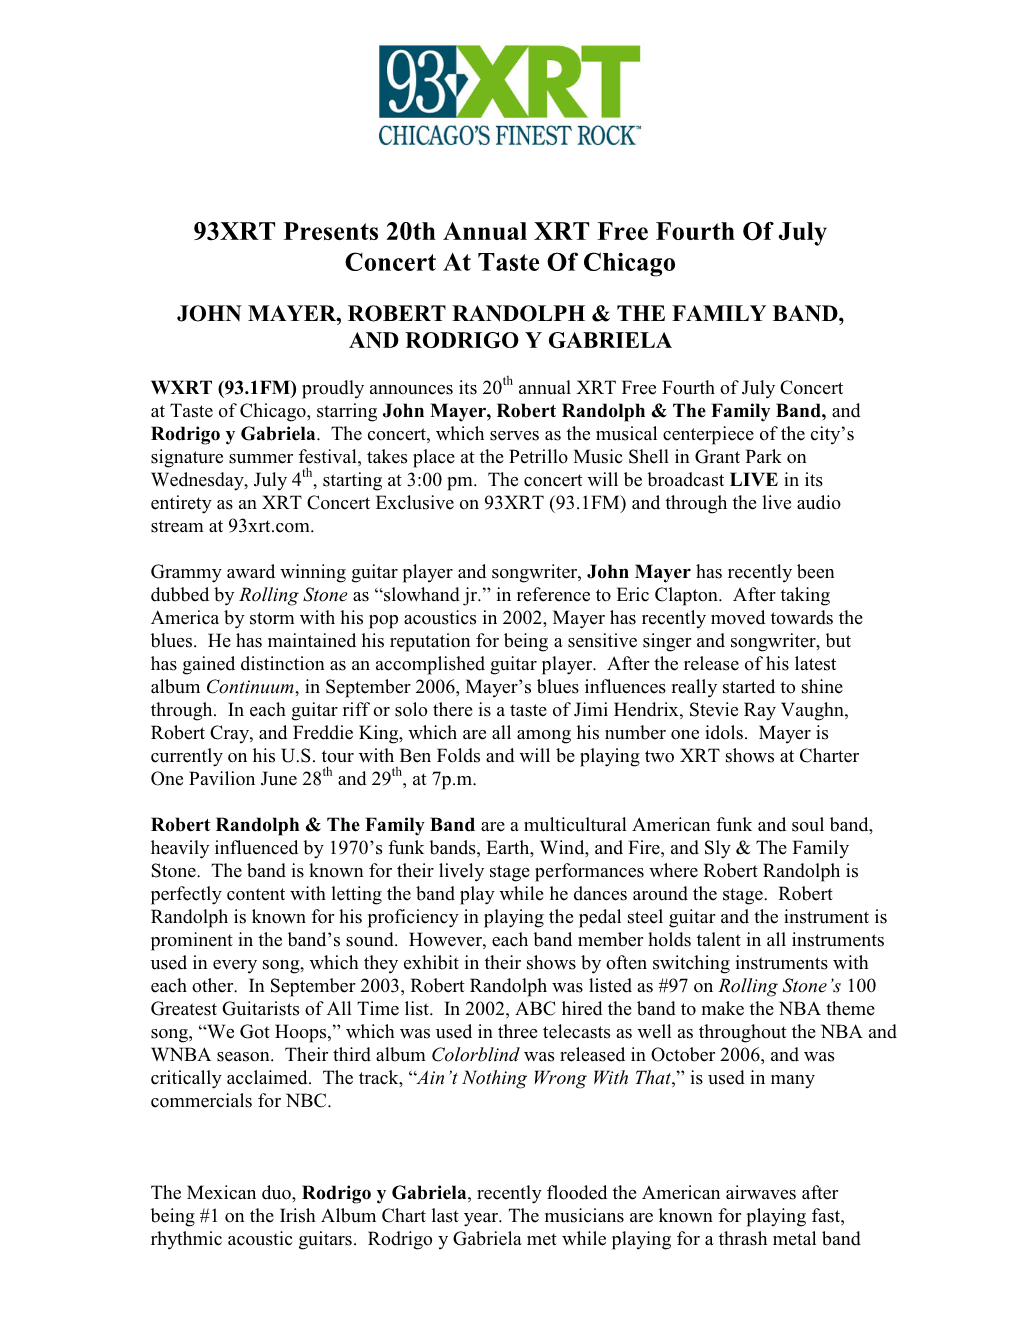 93XRT Presents 20Th Annual XRT Free Fourth of July Concert at Taste of Chicago